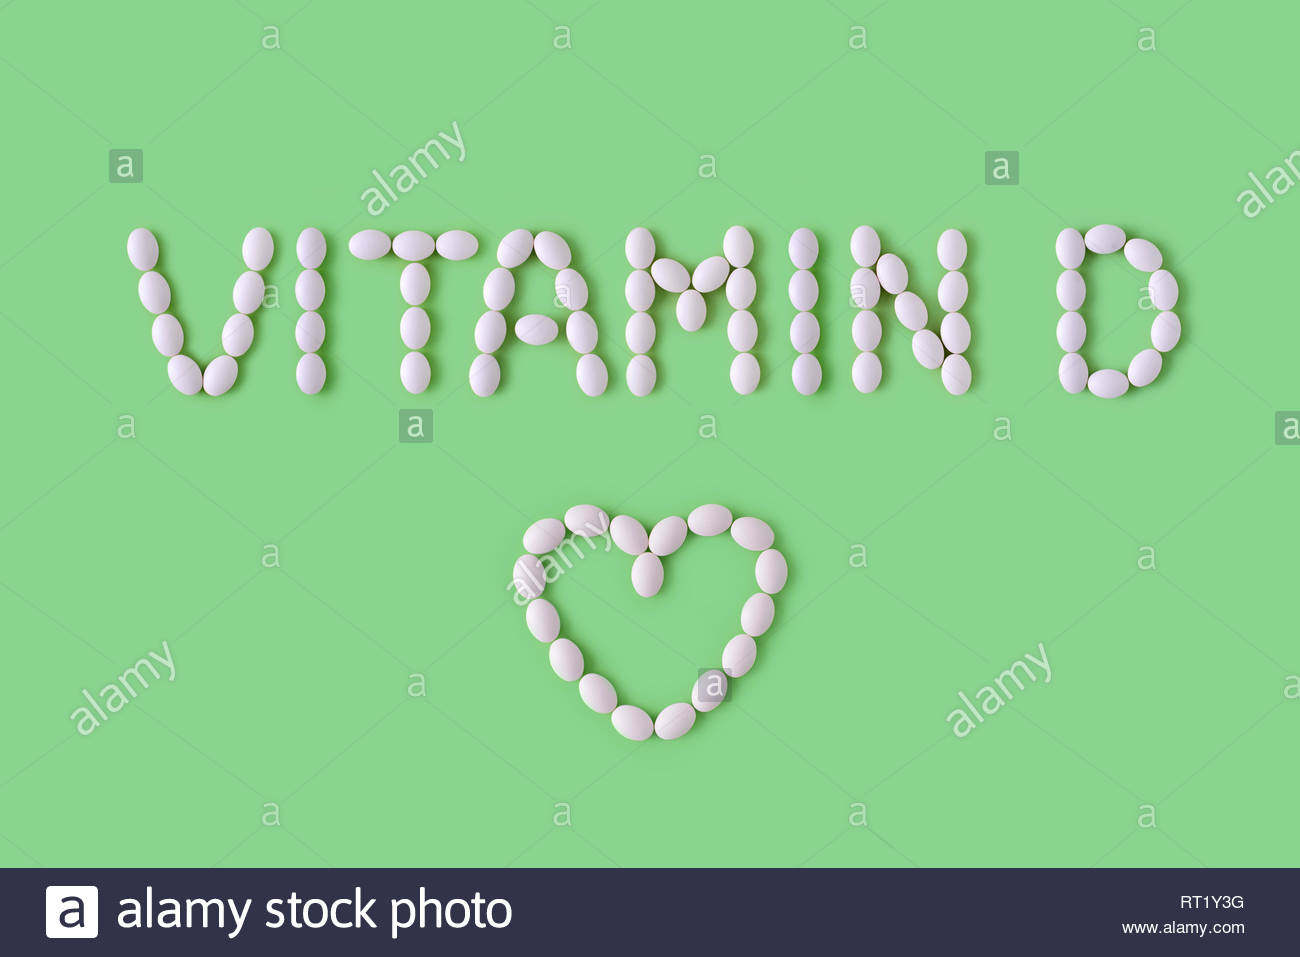 Vitamin D Pills Dropped From Bottle On Green Background Flat Lay